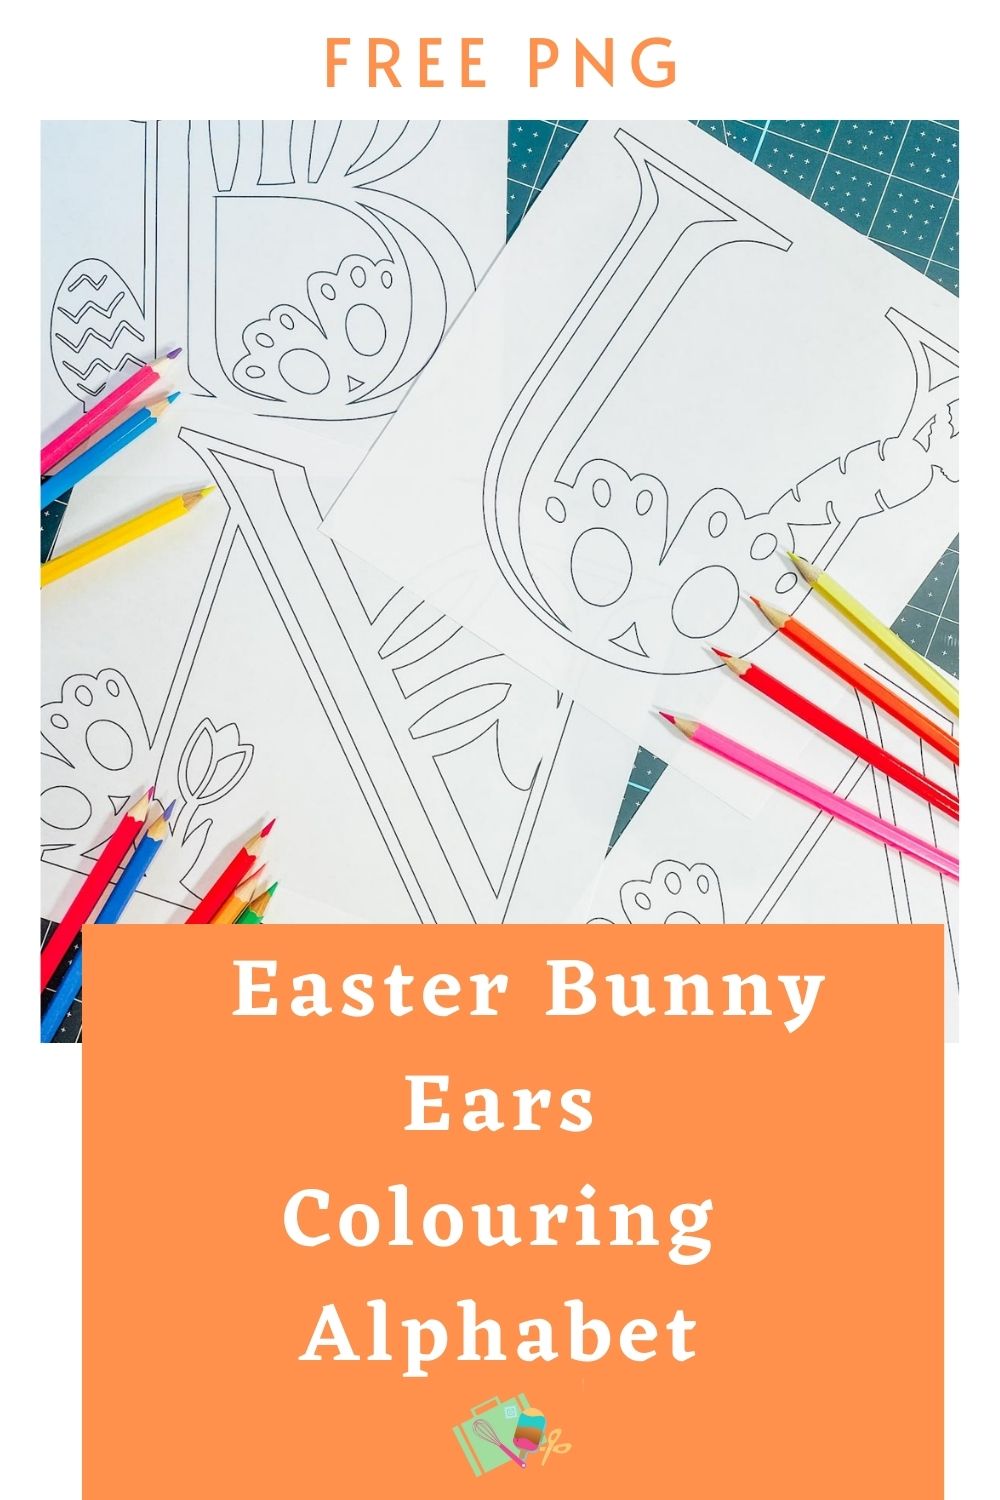 Free Easter Bunny Ears Colouring Alphabet For School and Home School-2